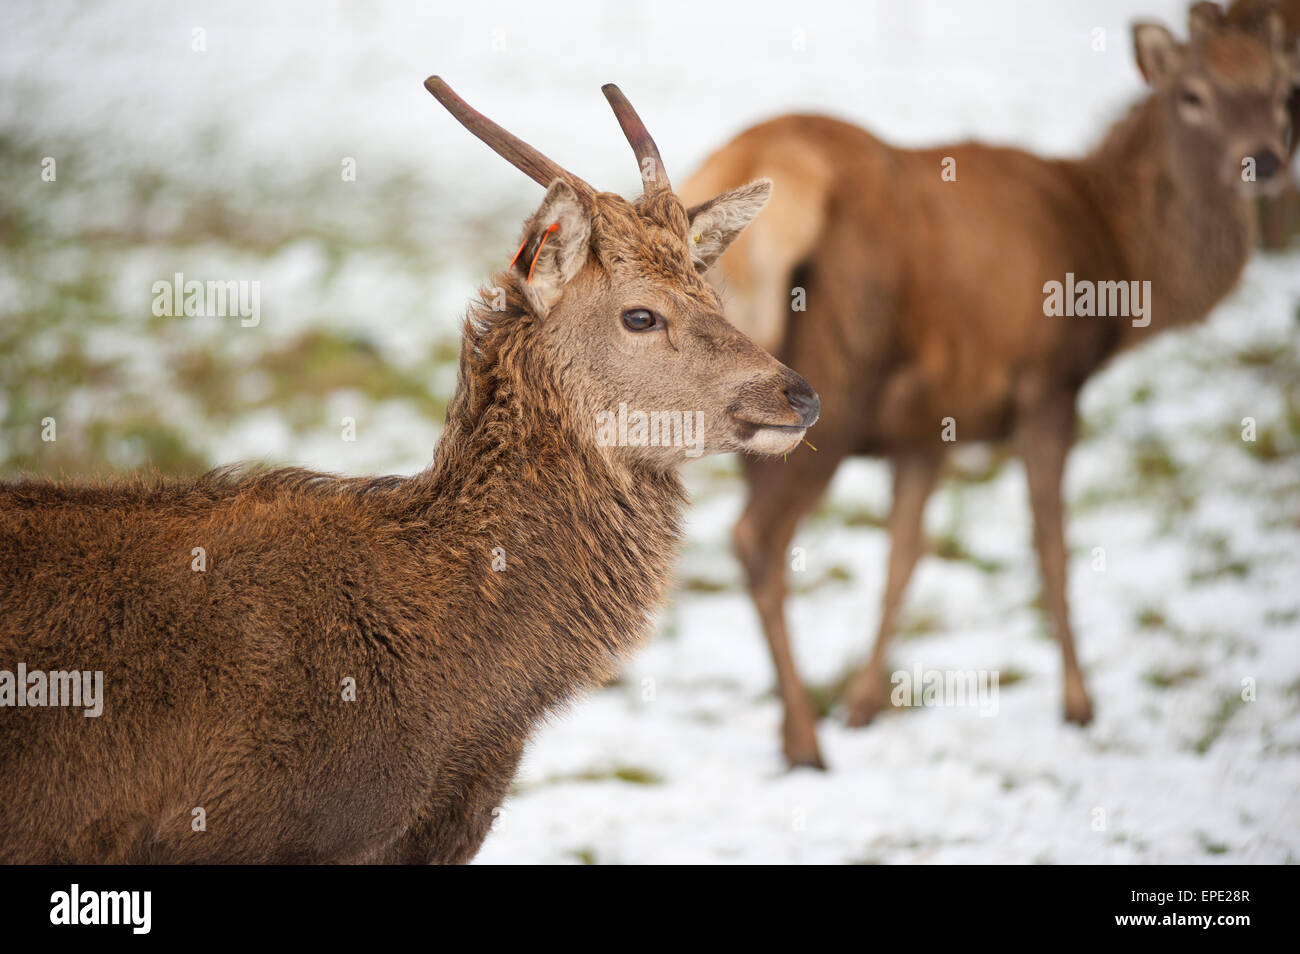 Young deer with antlers in the snow Stock Photo